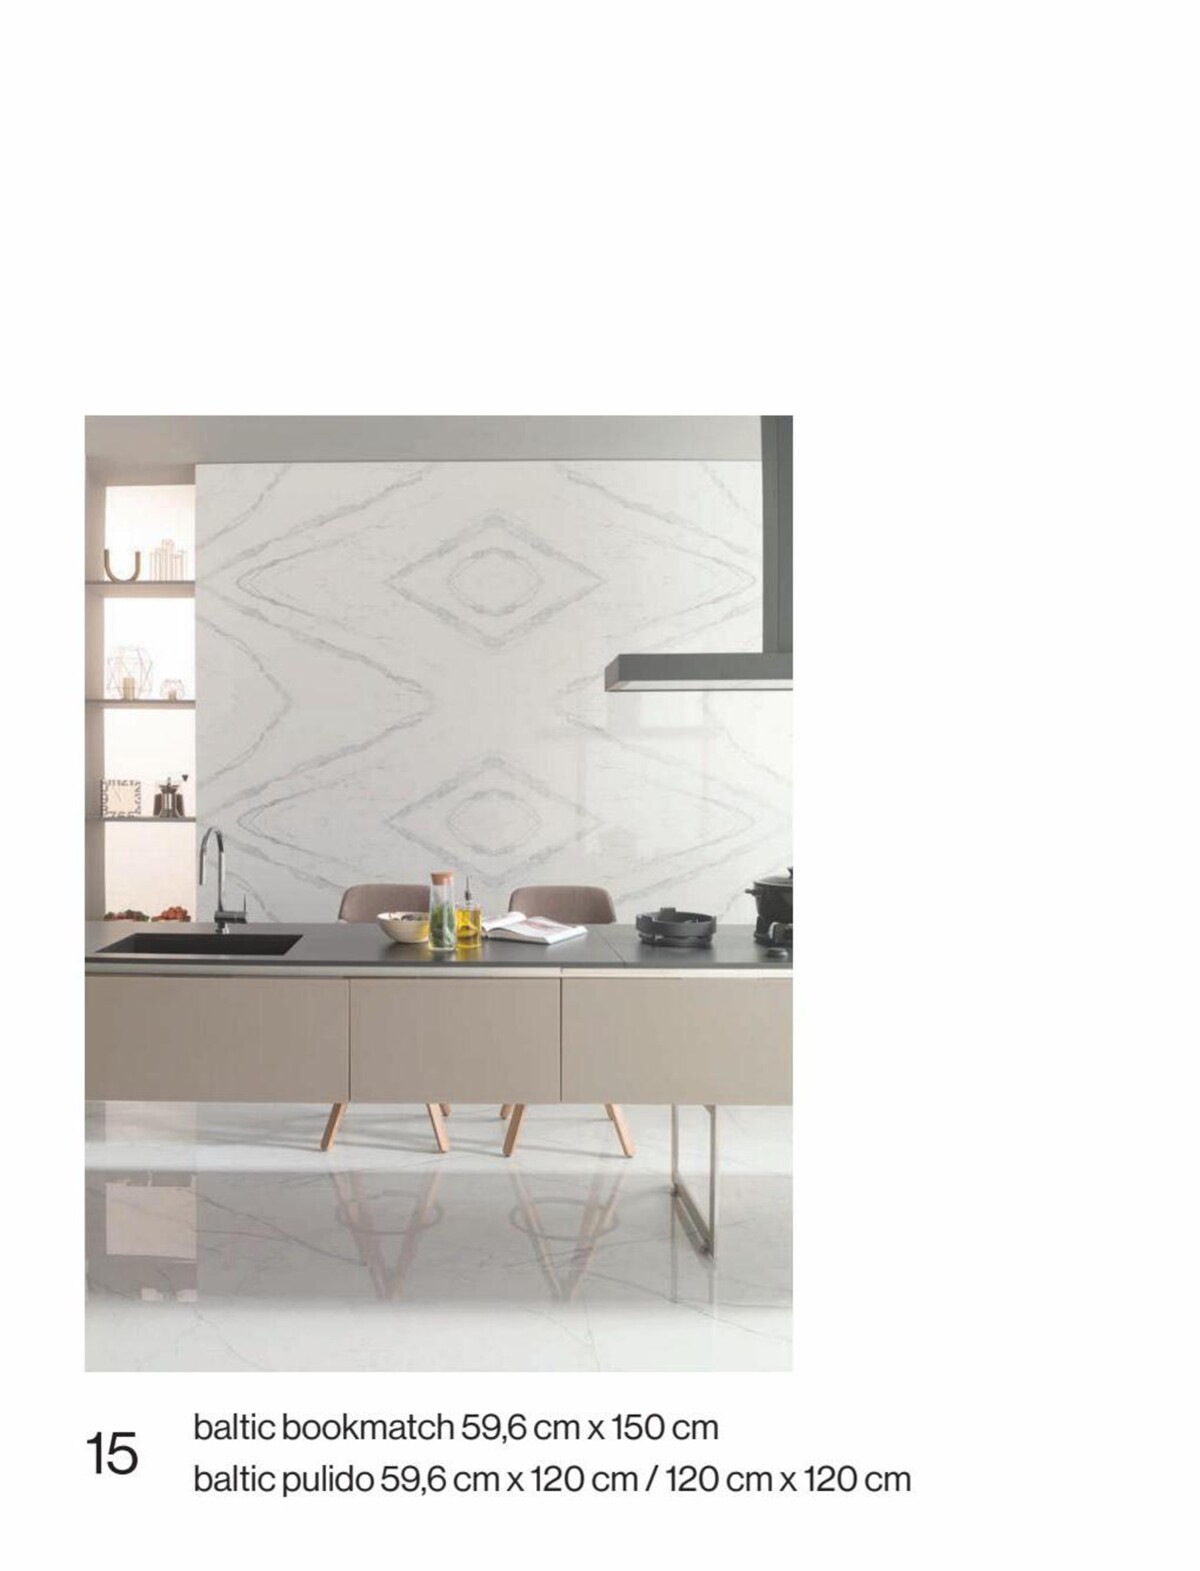 Catalogue MARMI,a ceramic tile that echoes the purity of marble, page 00015